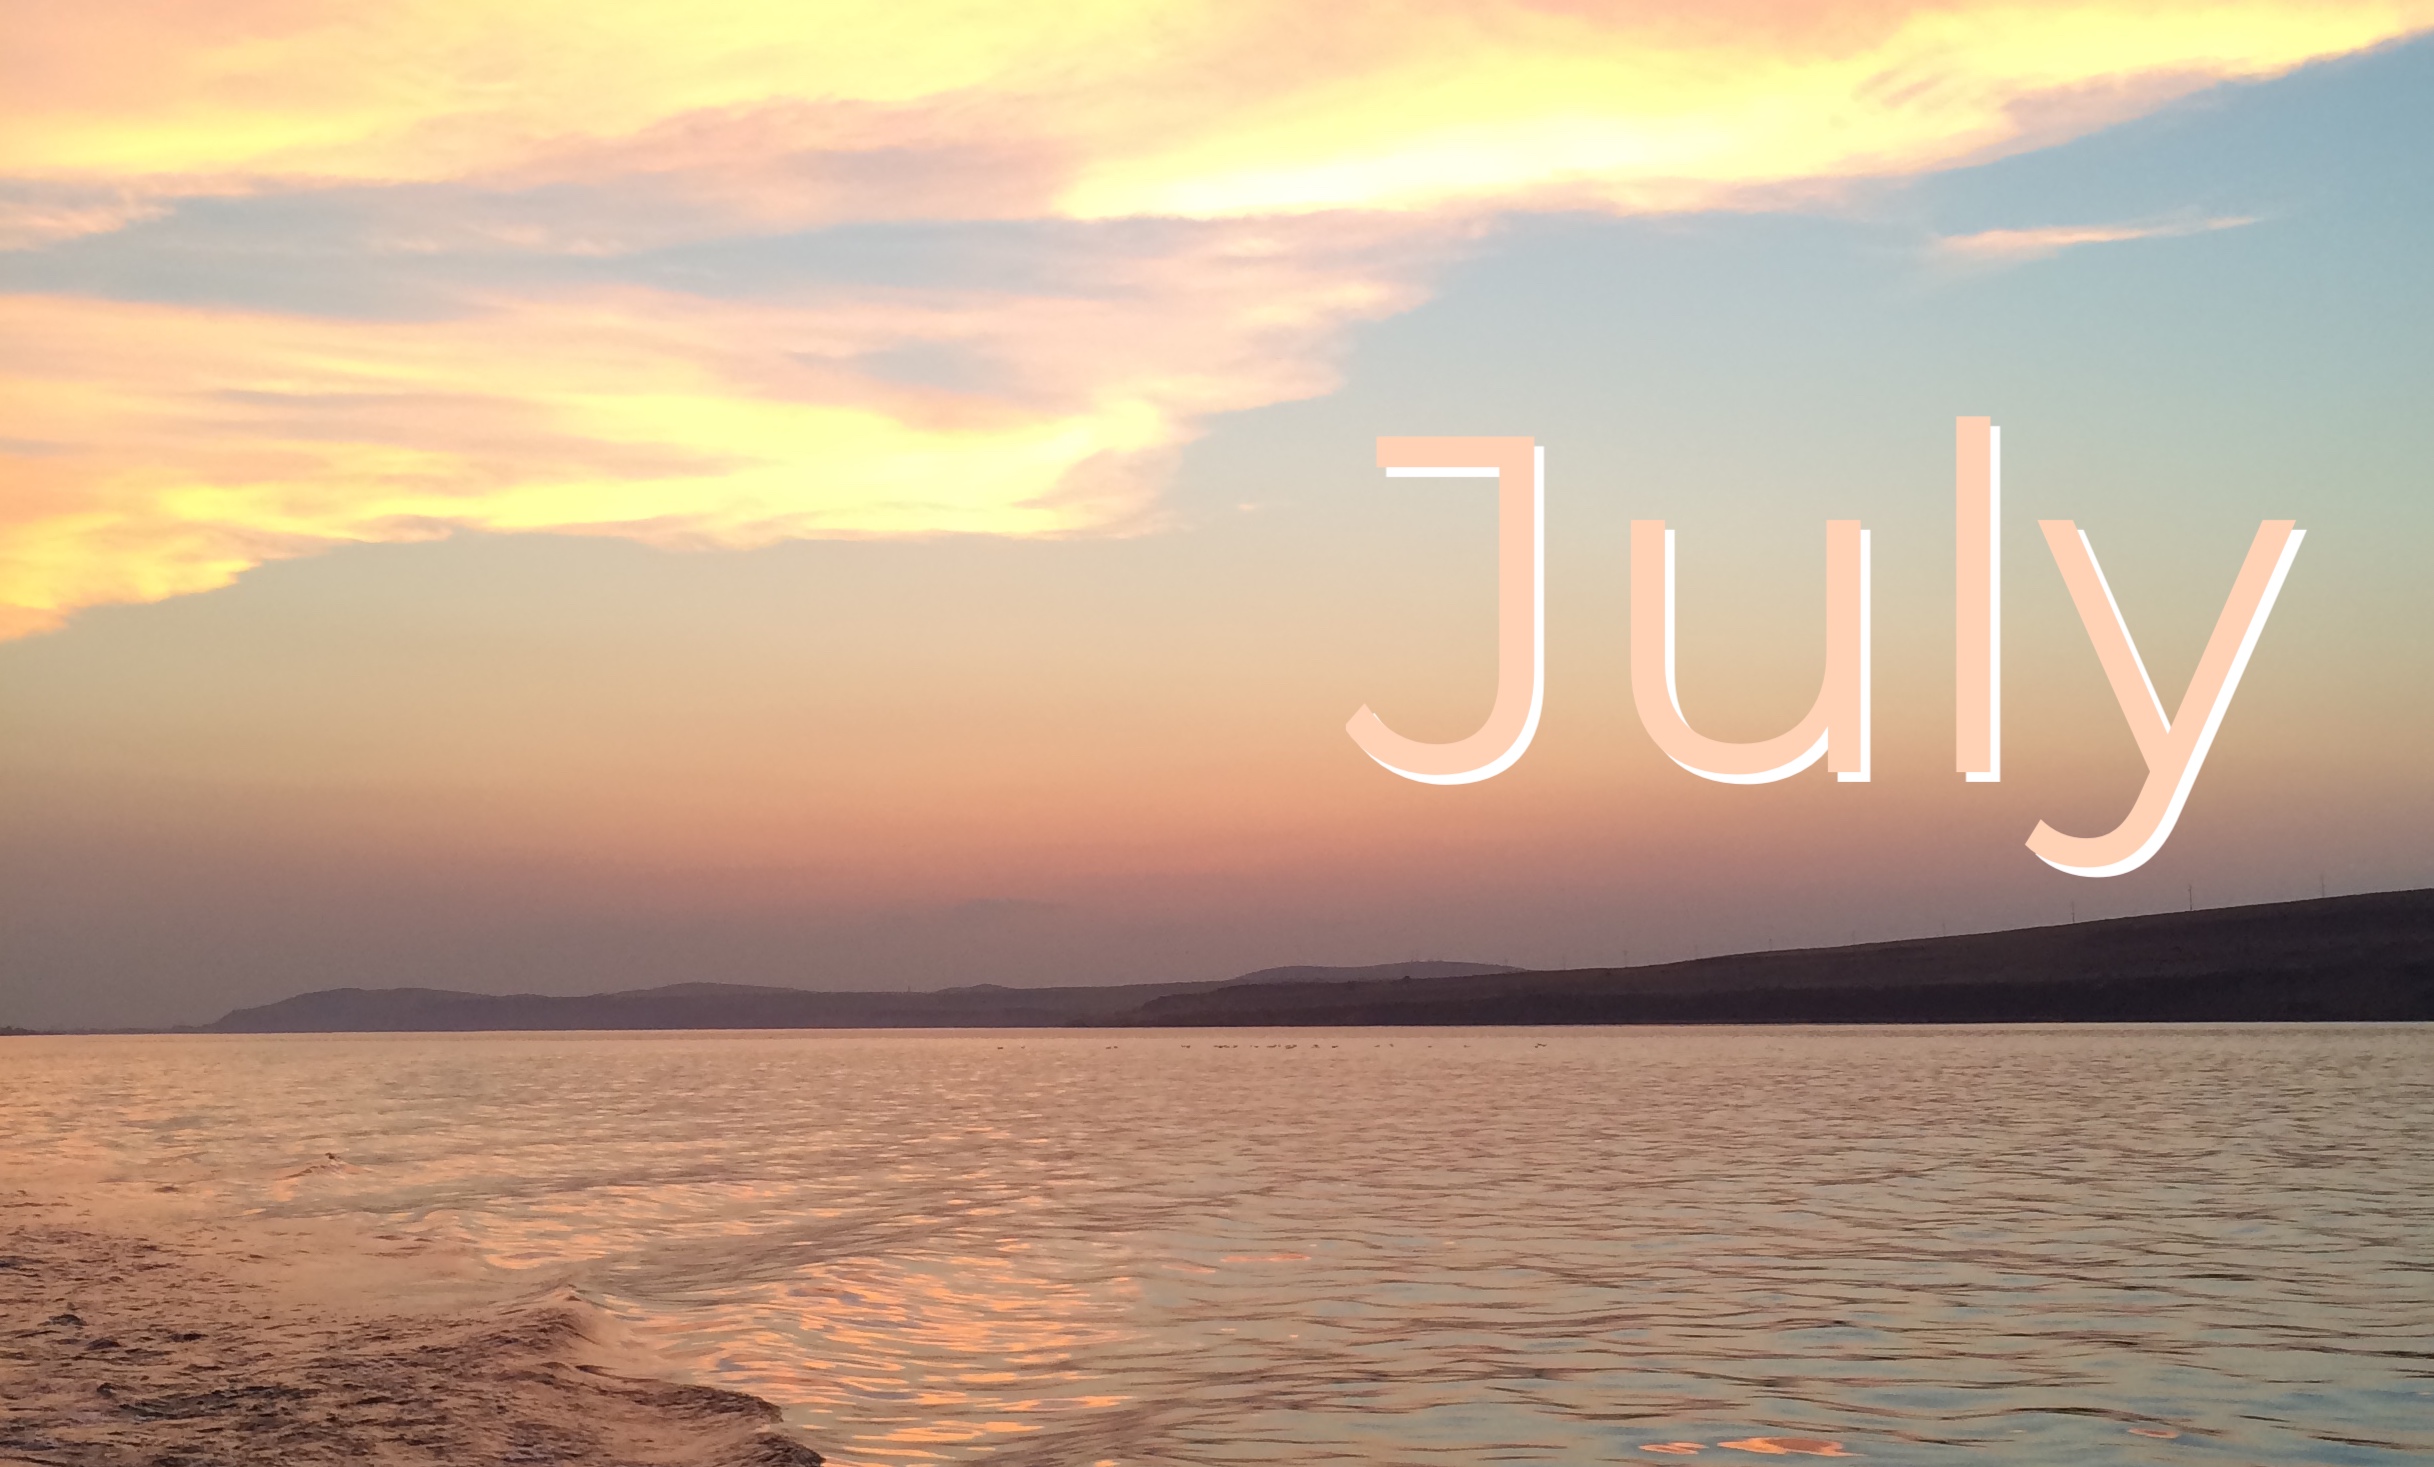 Sunset with July text